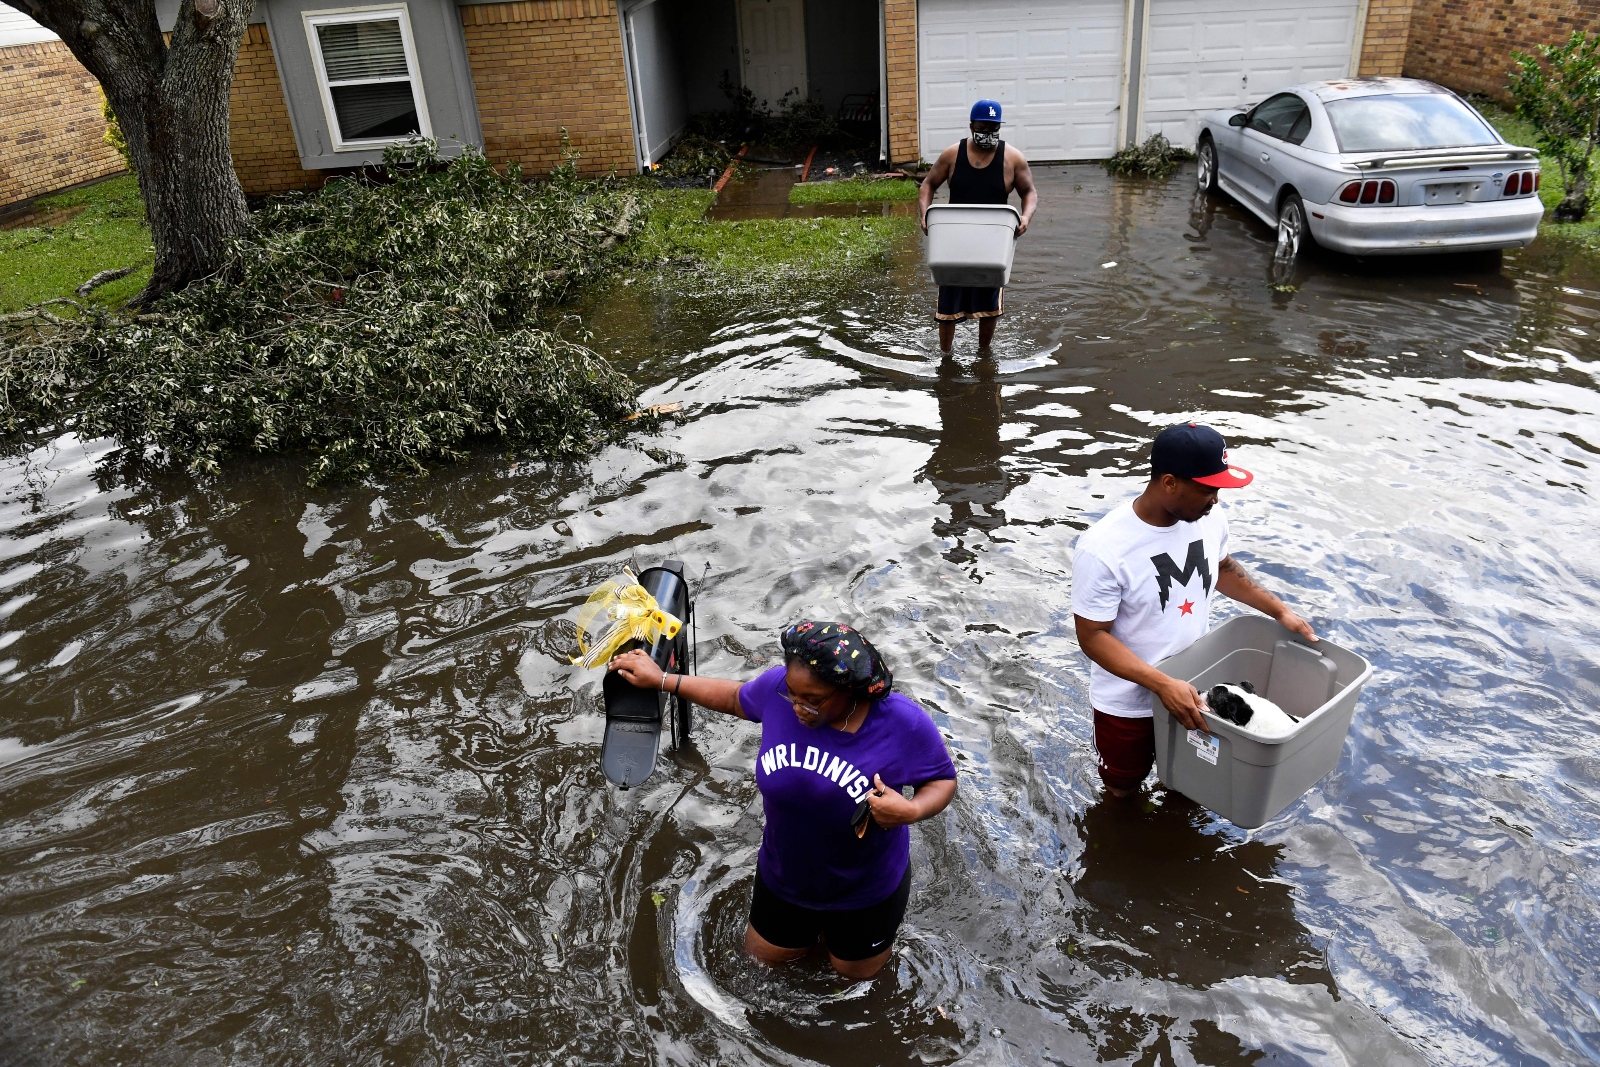 Residents in LaPlace, Louisiana, help evacuate neighbors from flooded homes on August 30, 2021, in the aftermath of Hurricane Ida.